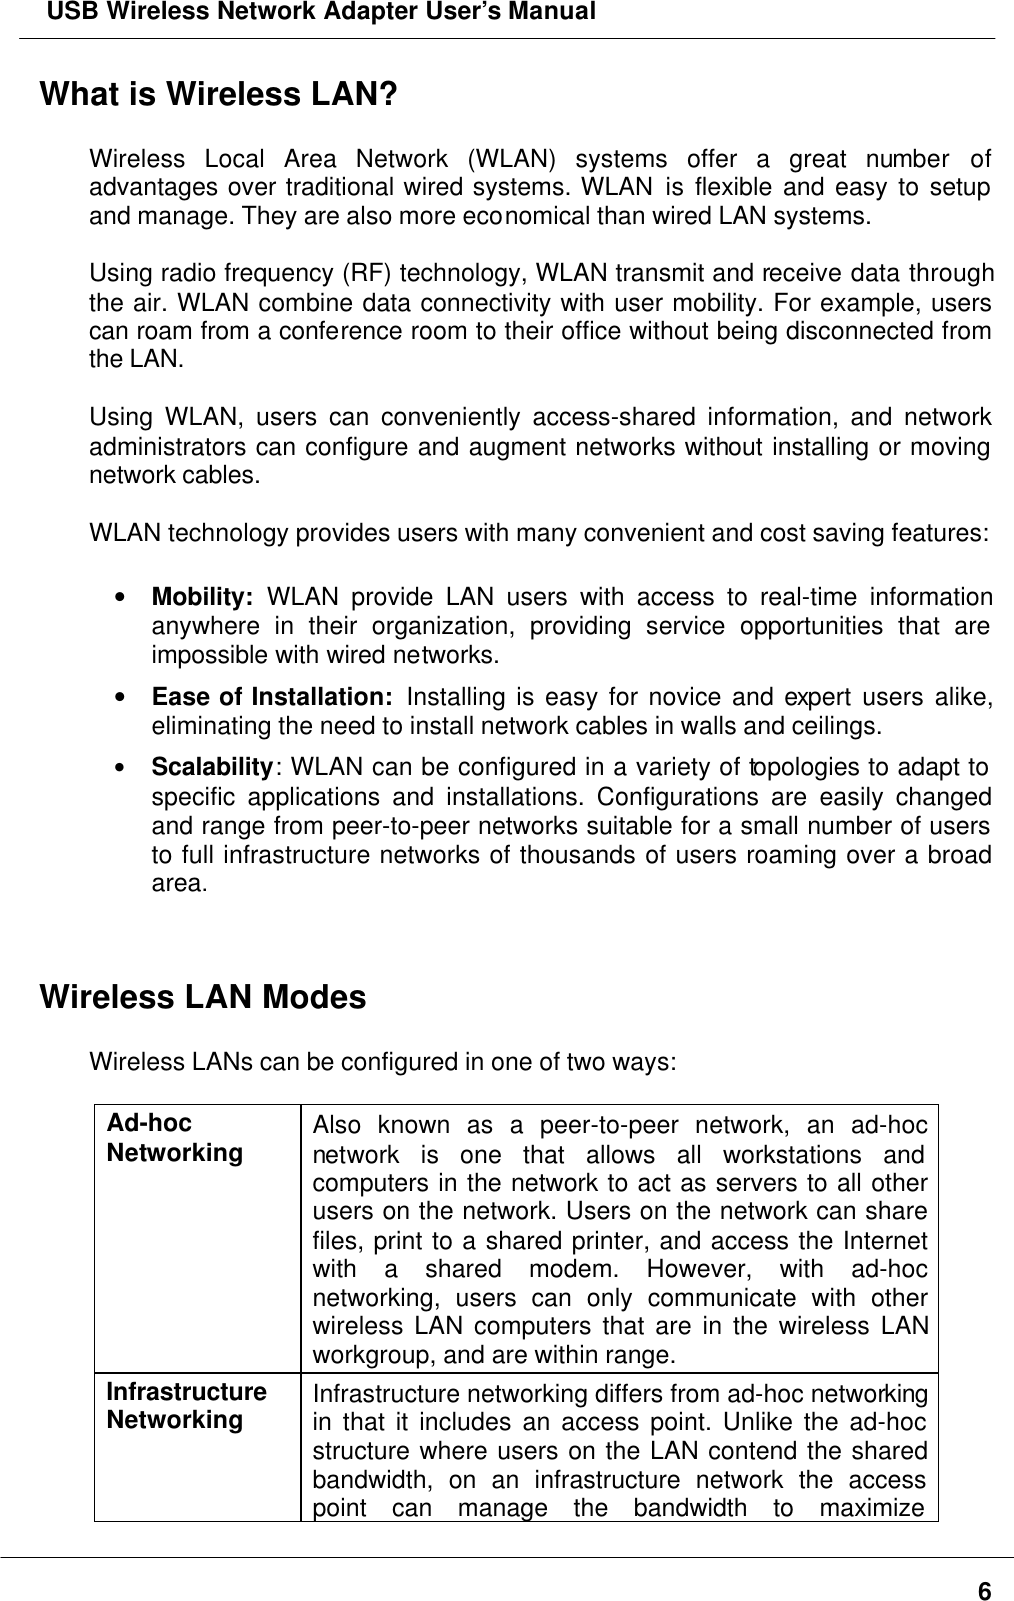  USB Wireless Network Adapter User’s Manual6What is Wireless LAN?Wireless Local Area Network (WLAN) systems offer a great number ofadvantages over traditional wired systems. WLAN is flexible and easy to setupand manage. They are also more economical than wired LAN systems.Using radio frequency (RF) technology, WLAN transmit and receive data throughthe air. WLAN combine data connectivity with user mobility. For example, userscan roam from a conference room to their office without being disconnected fromthe LAN.Using WLAN, users can conveniently access-shared information, and networkadministrators can configure and augment networks without installing or movingnetwork cables.WLAN technology provides users with many convenient and cost saving features:• Mobility: WLAN provide LAN users with access to real-time informationanywhere in their organization, providing service opportunities that areimpossible with wired networks.• Ease of Installation:  Installing is easy for novice and expert users alike,eliminating the need to install network cables in walls and ceilings.• Scalability: WLAN can be configured in a variety of topologies to adapt tospecific applications and installations. Configurations are easily changedand range from peer-to-peer networks suitable for a small number of usersto full infrastructure networks of thousands of users roaming over a broadarea.Wireless LAN ModesWireless LANs can be configured in one of two ways:Ad-hocNetworking Also known as a peer-to-peer network, an ad-hocnetwork is one that allows all workstations andcomputers in the network to act as servers to all otherusers on the network. Users on the network can sharefiles, print to a shared printer, and access the Internetwith a shared modem. However, with ad-hocnetworking, users can only communicate with otherwireless LAN computers that are in the wireless LANworkgroup, and are within range.InfrastructureNetworking Infrastructure networking differs from ad-hoc networkingin that it includes an access point. Unlike the ad-hocstructure where users on the LAN contend the sharedbandwidth, on an infrastructure network the accesspoint can manage the bandwidth to maximize